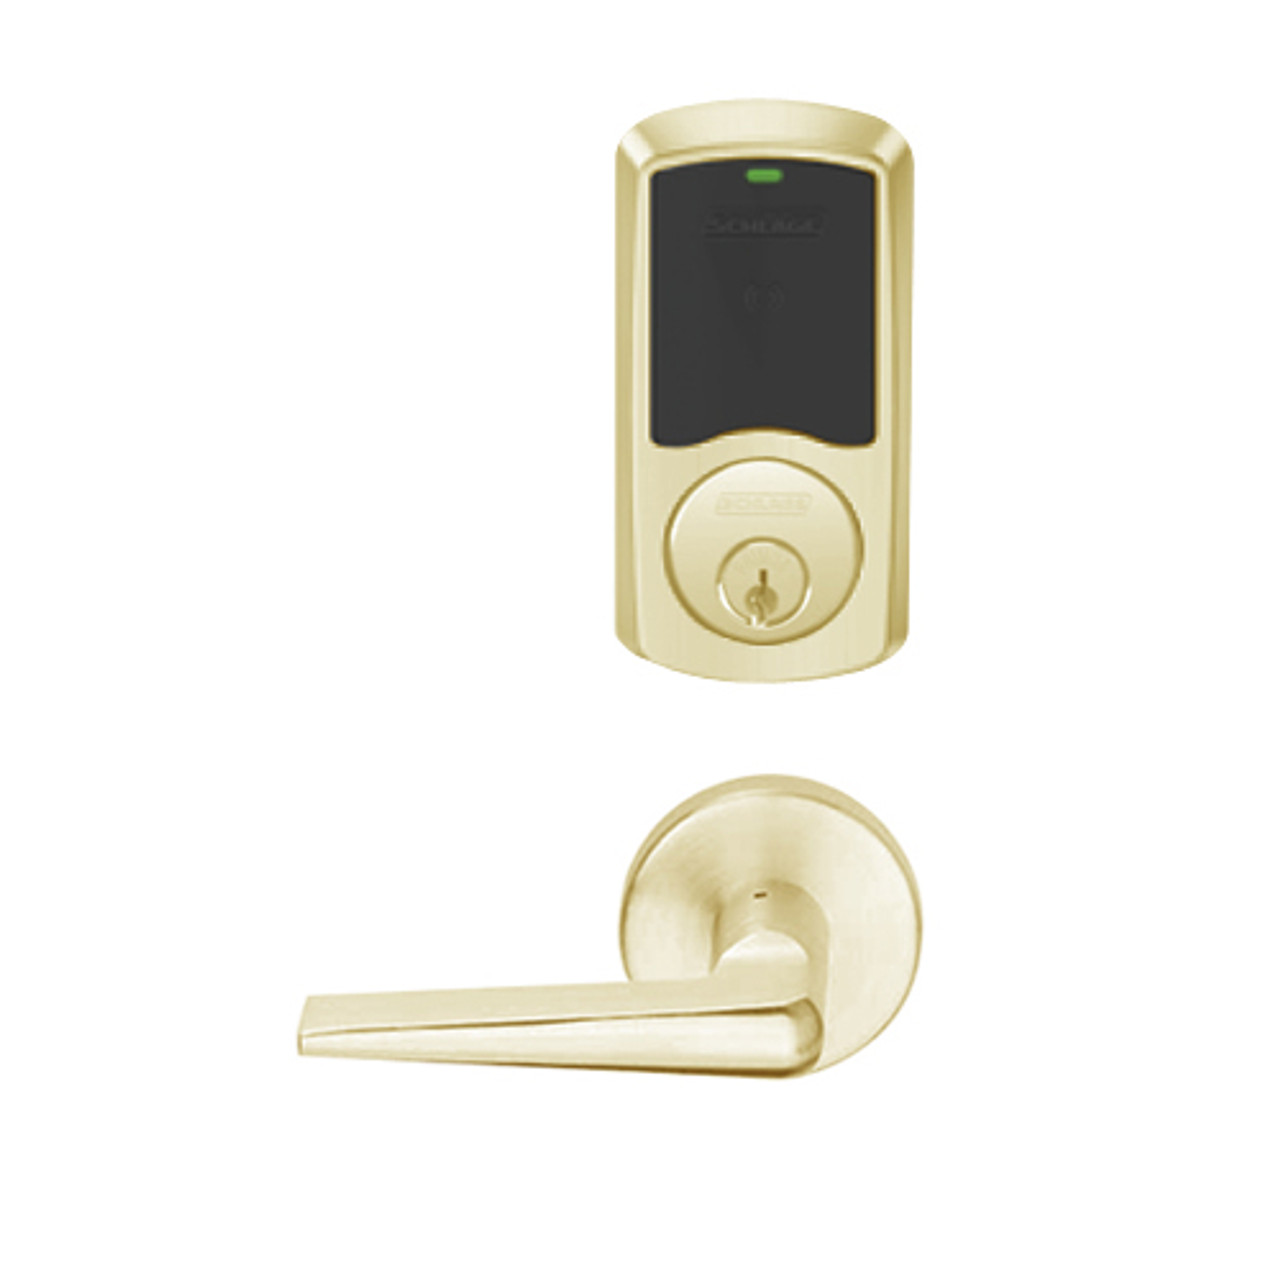 LEMB-GRW-P-05-606-00A Schlage Privacy/Office Wireless Greenwich Mortise Lock with Push Button & LED Indicator and 05 Lever in Satin Brass